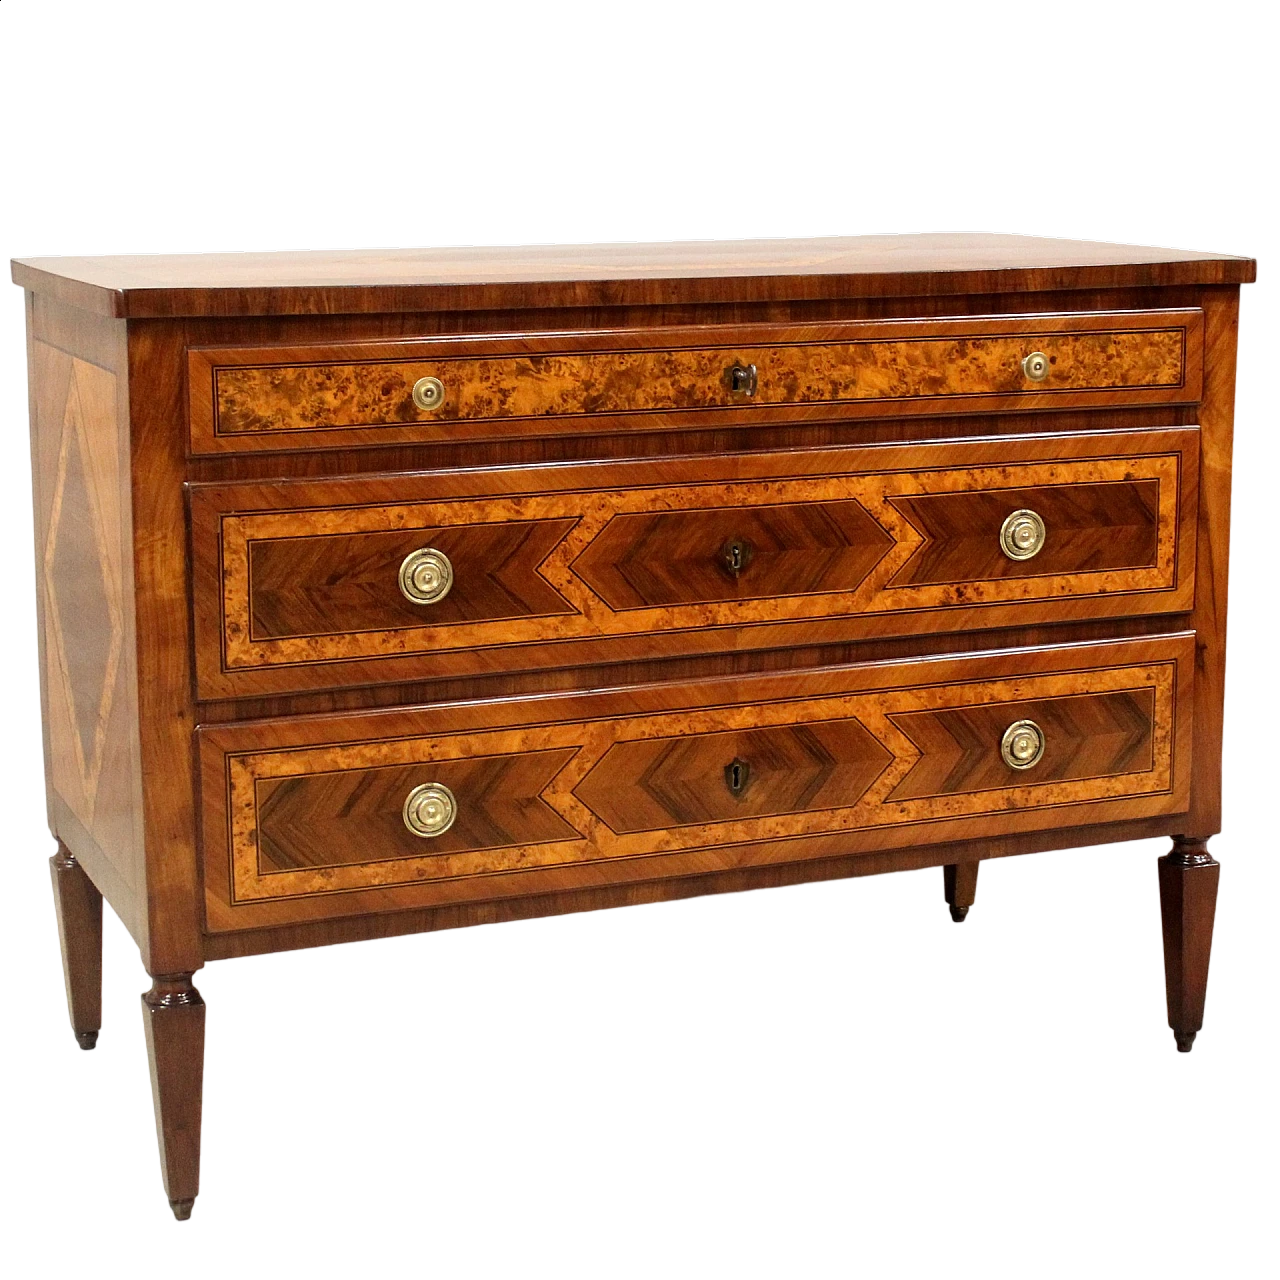 Emilian Louis XVI walnut and cherry commode with inlays, 18th century 11